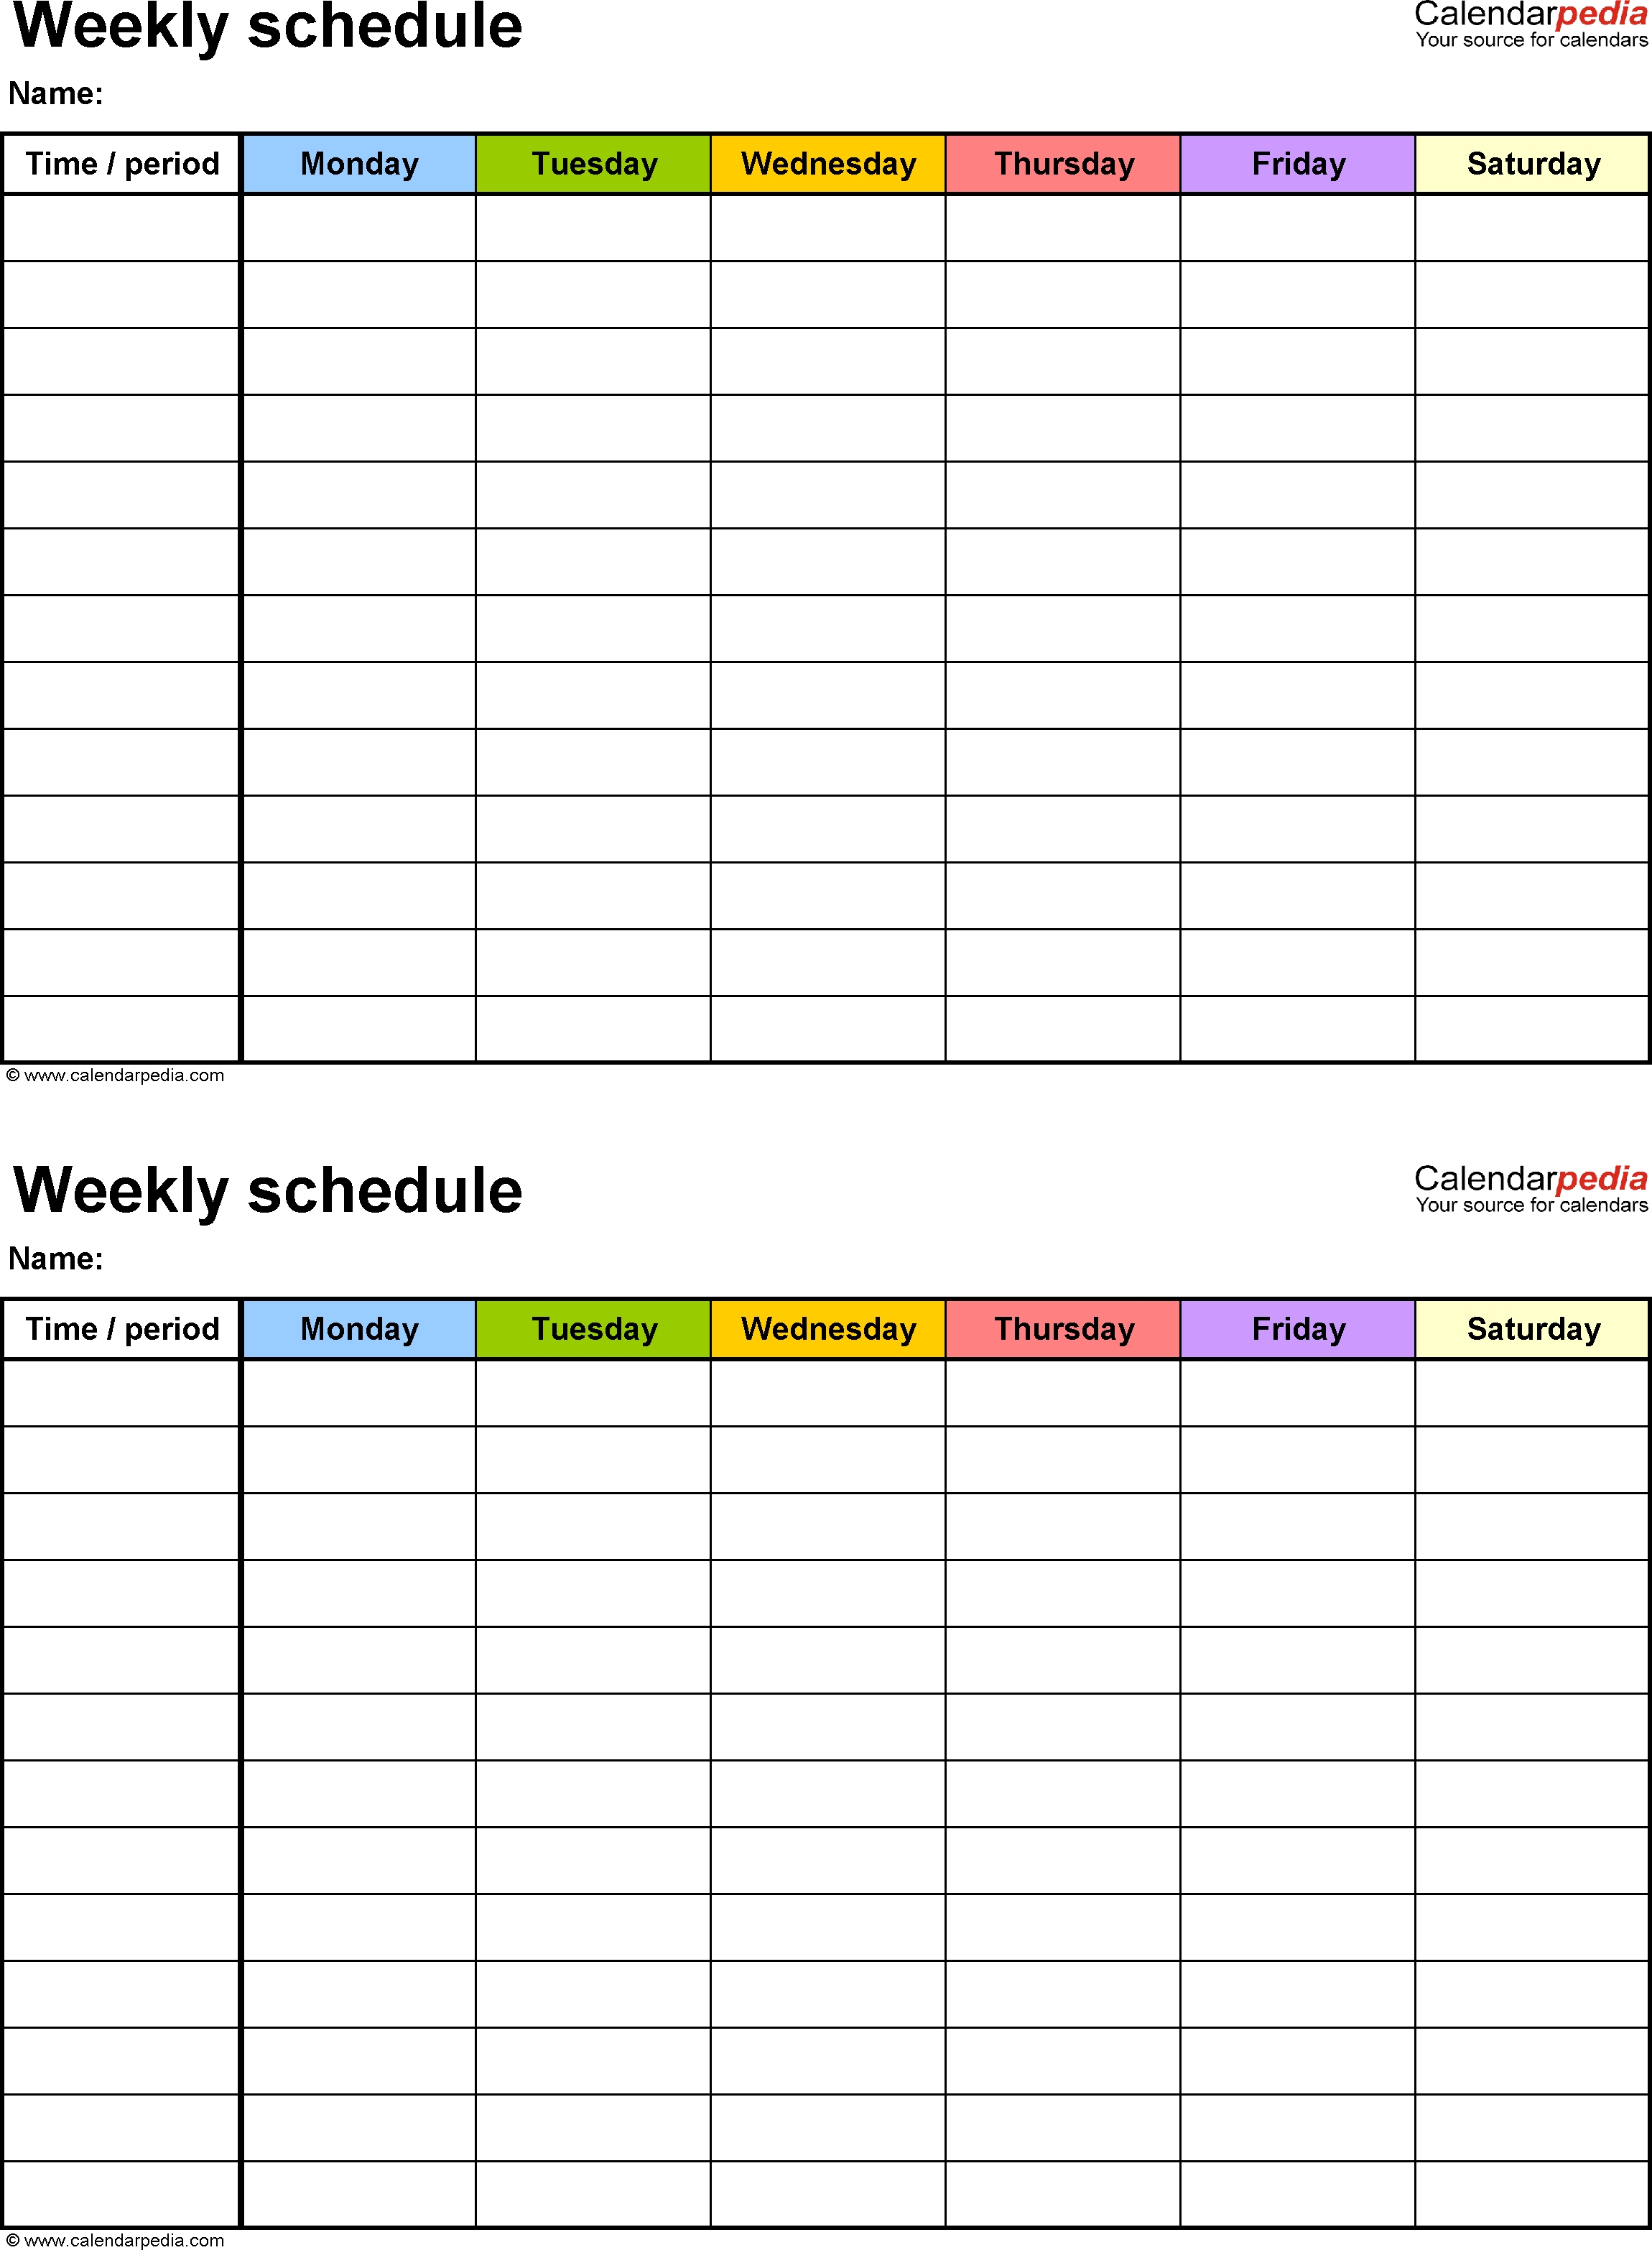 Free Weekly Schedule Templates For Word - 18 Templates in 7 Day Week Calendar Printable